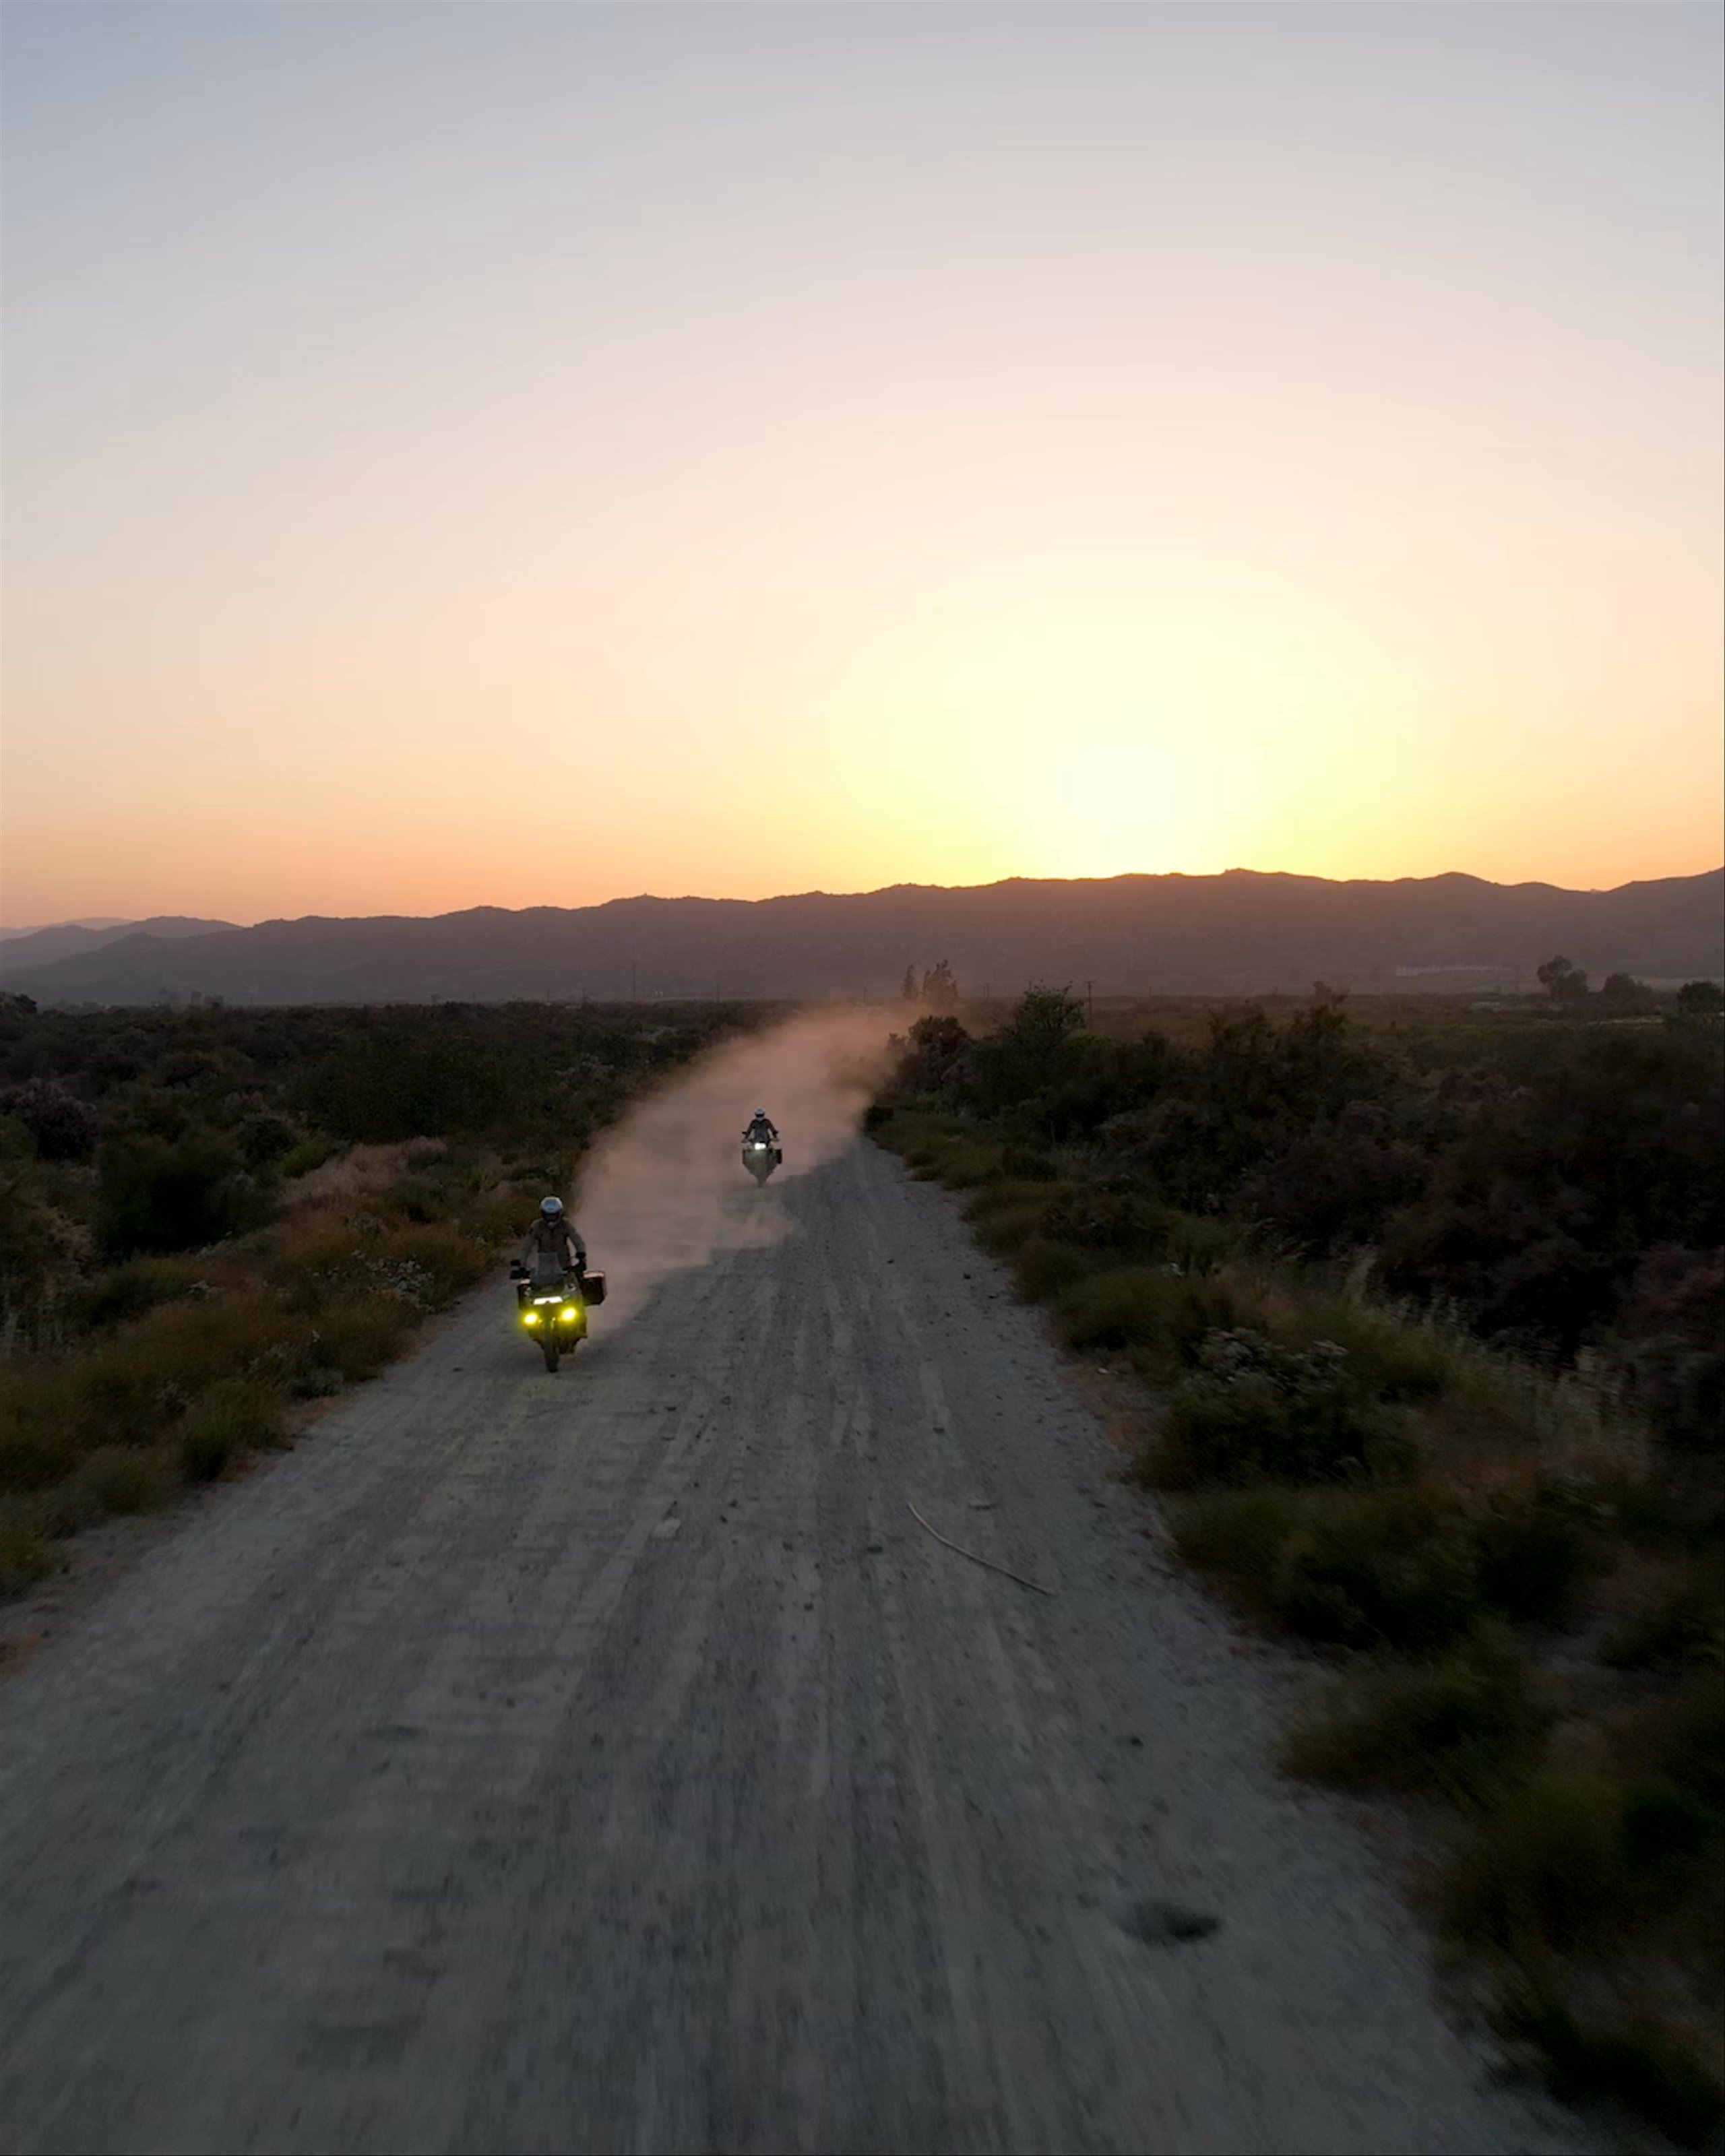 Video of motorcyclists riding down dirt road at sunset in Baja California